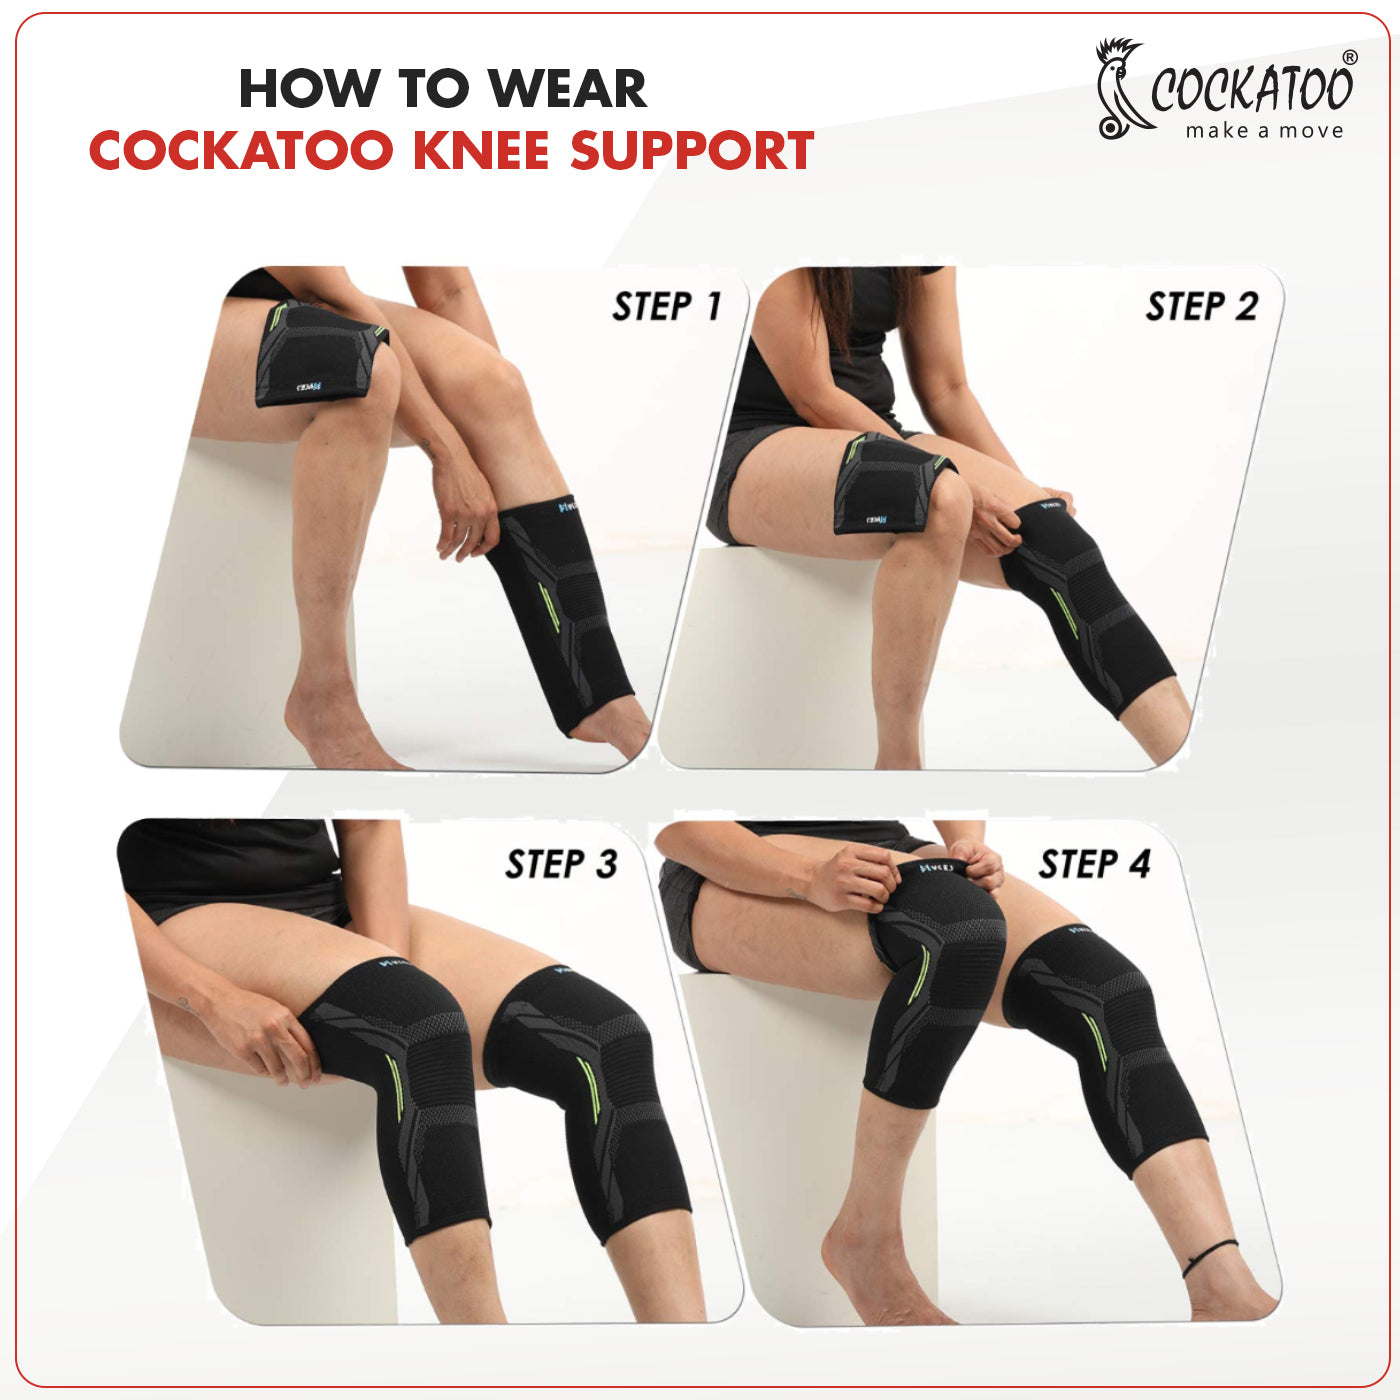 Cockatoo Knee Compression Support KN-222 - Nylon & Spandex Material - Green Color - Extra-Large Size - for Gym, Running, Cycling, Sports, Jogging, Workout, and Pain Relief